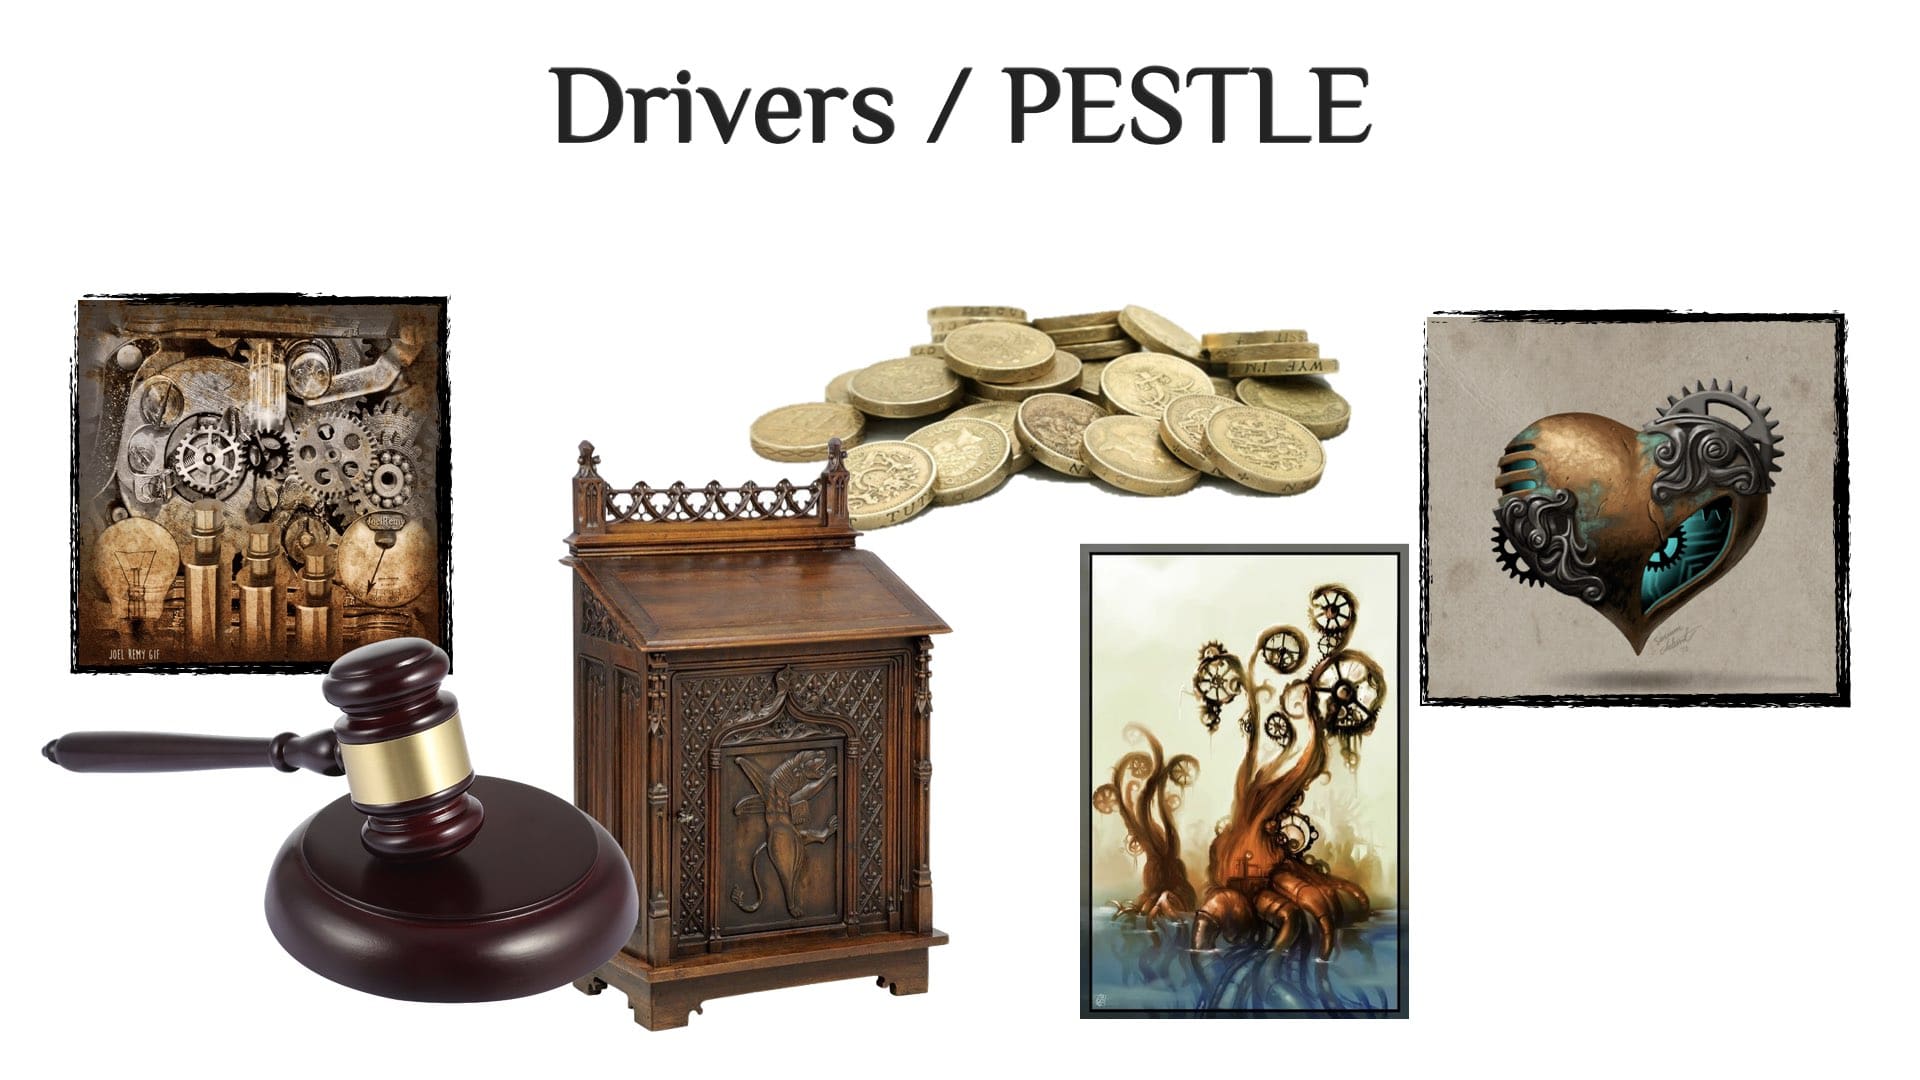 PESTLE drivers indicate where change comes from